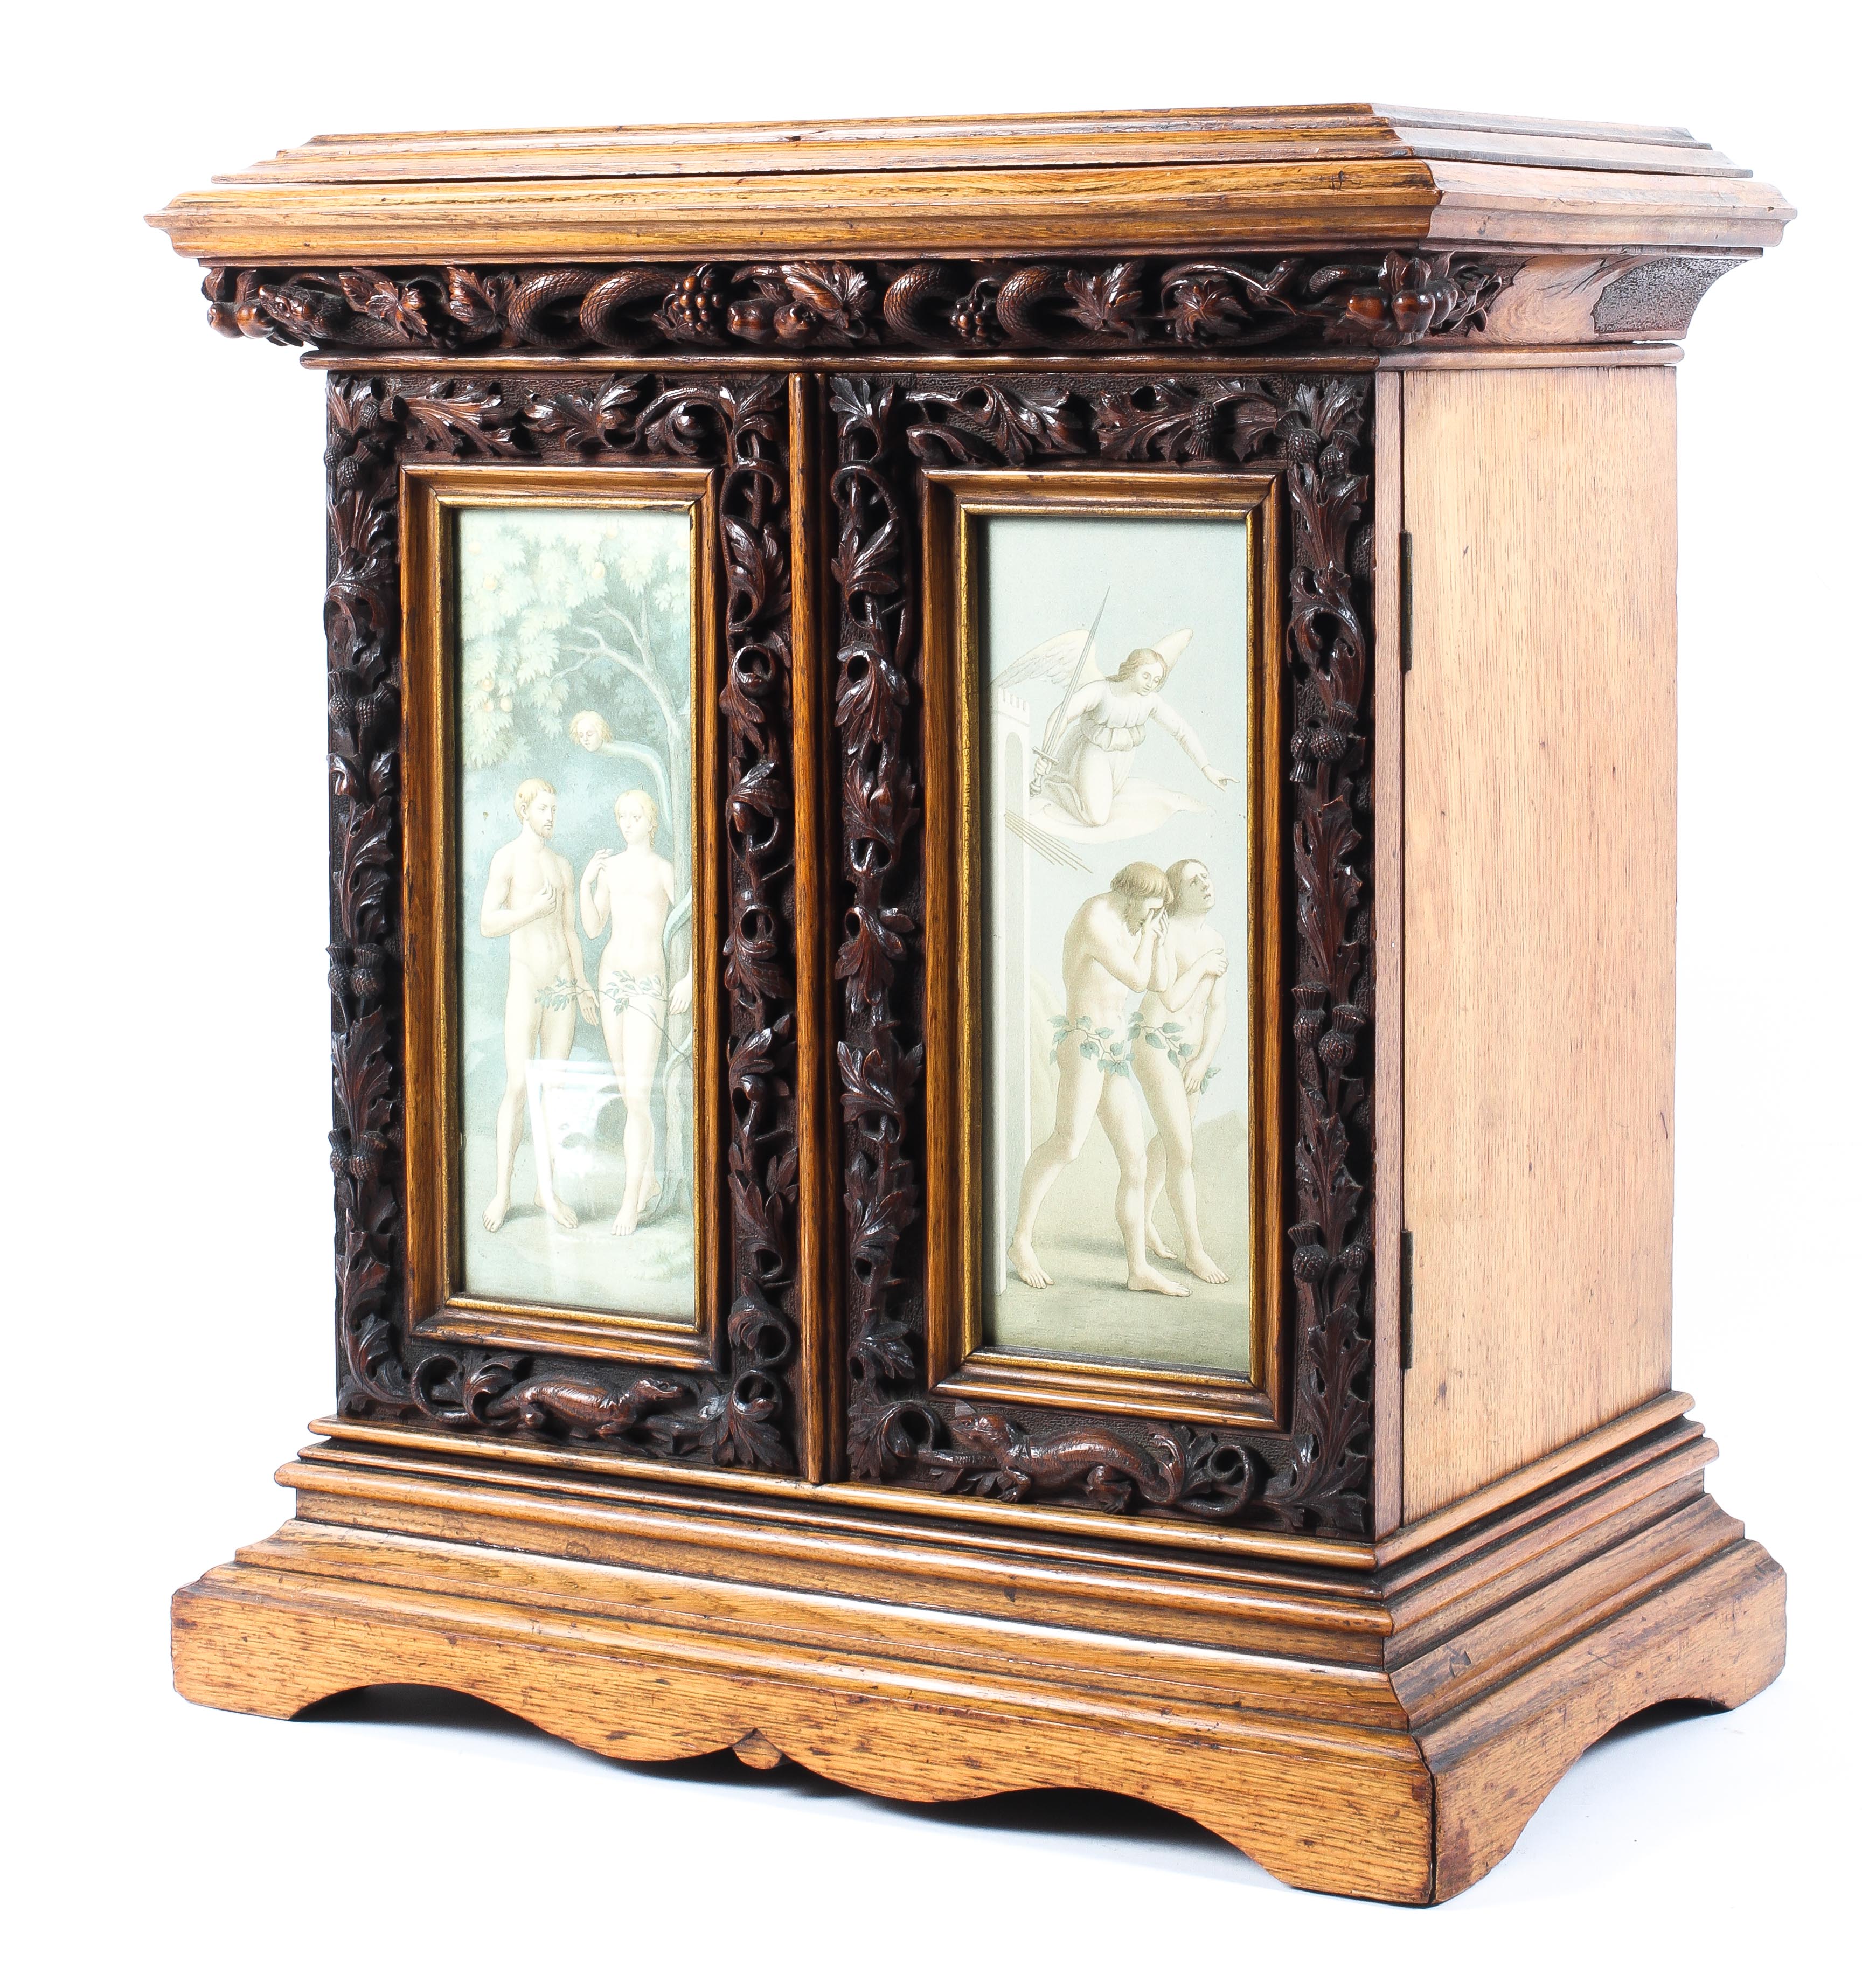 A finely carved early 20th century collector's cabinet with religious theme,